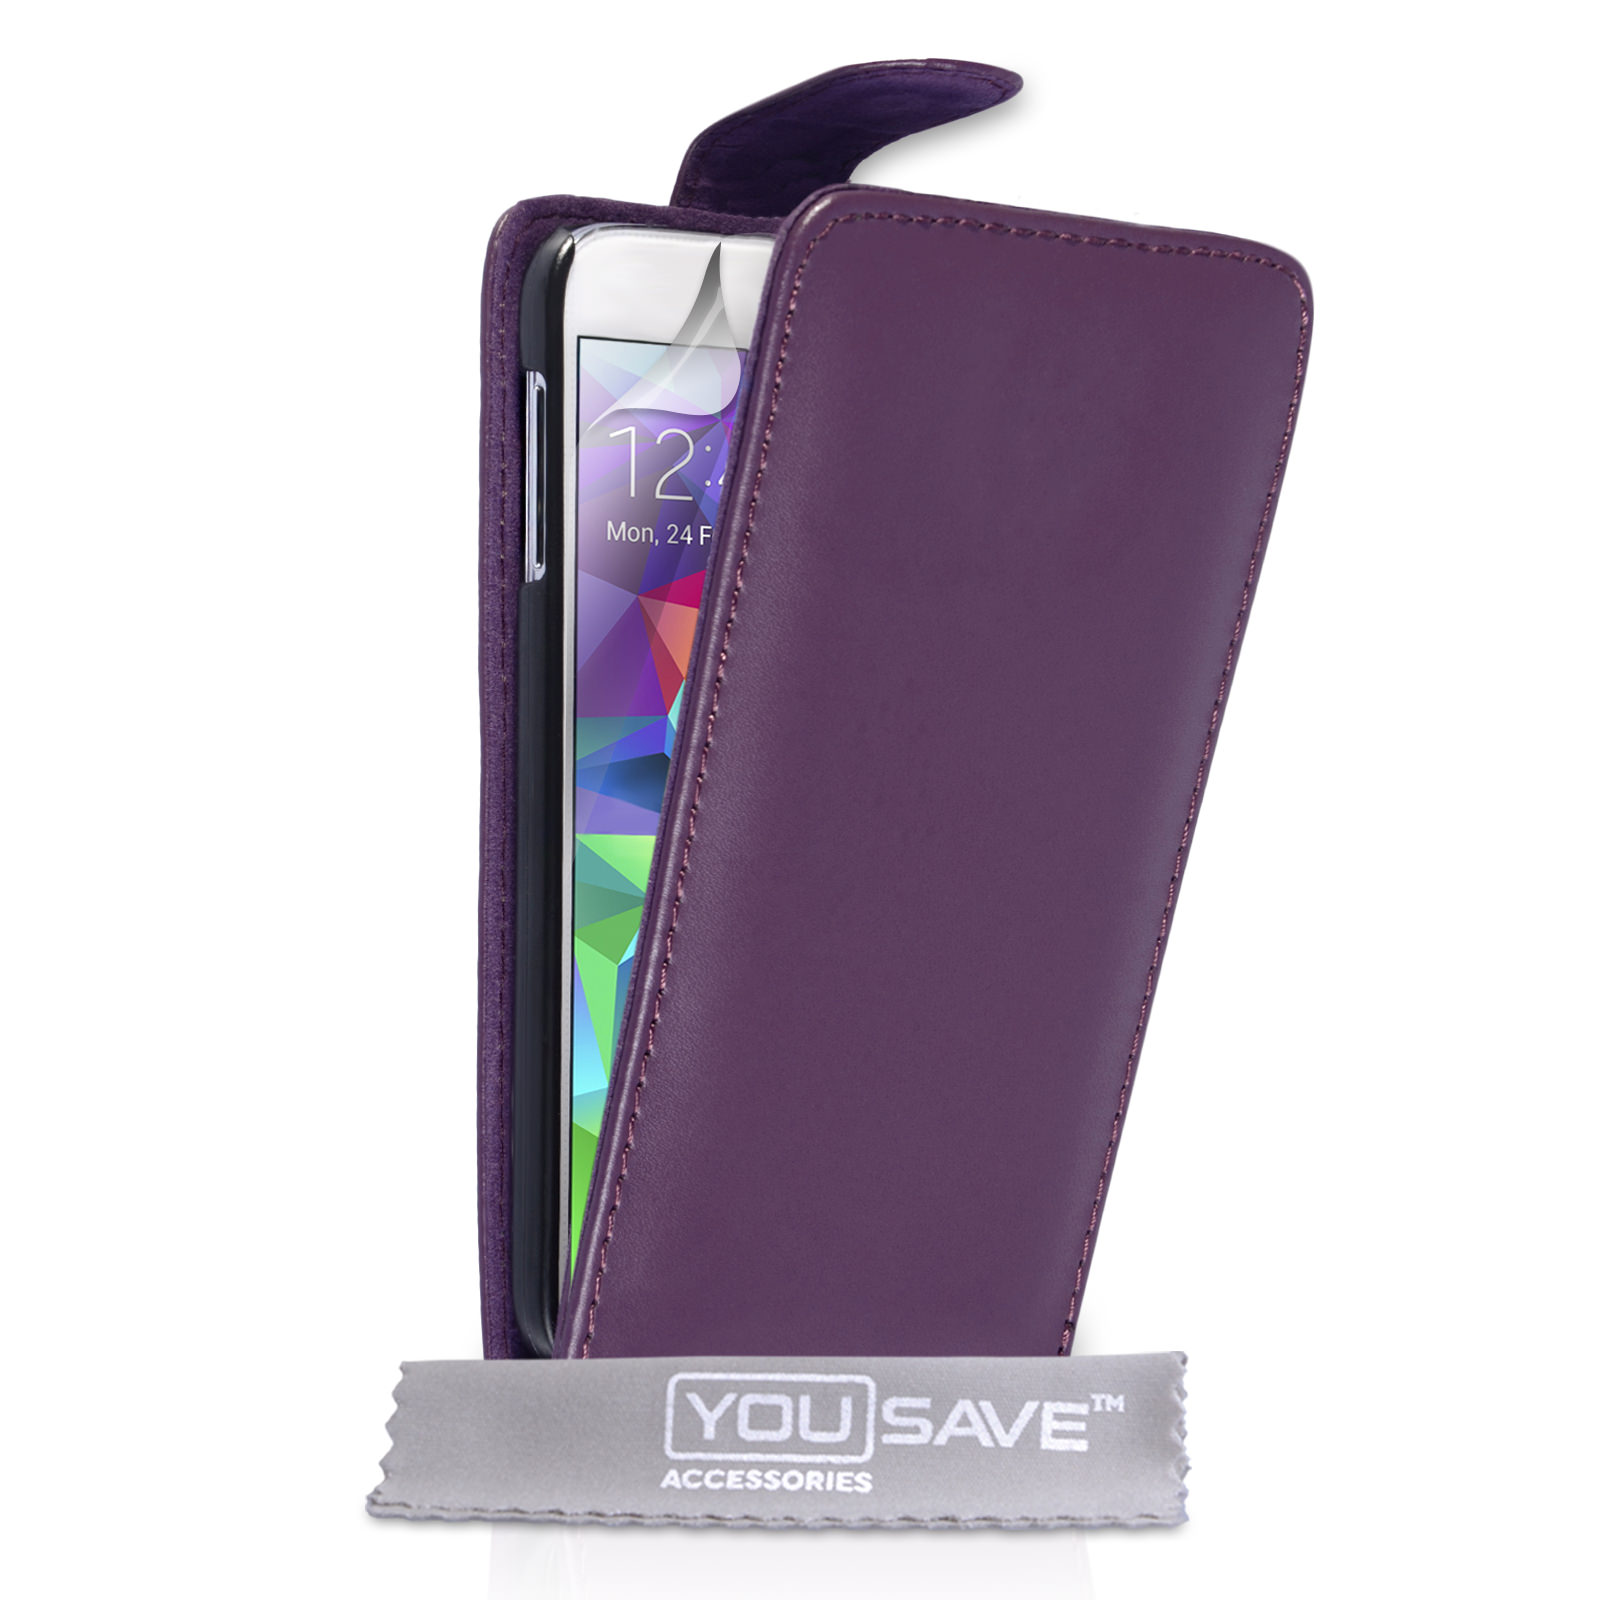 YouSave Samsung Galaxy S5 Leather-Effect Flip Case - Purple